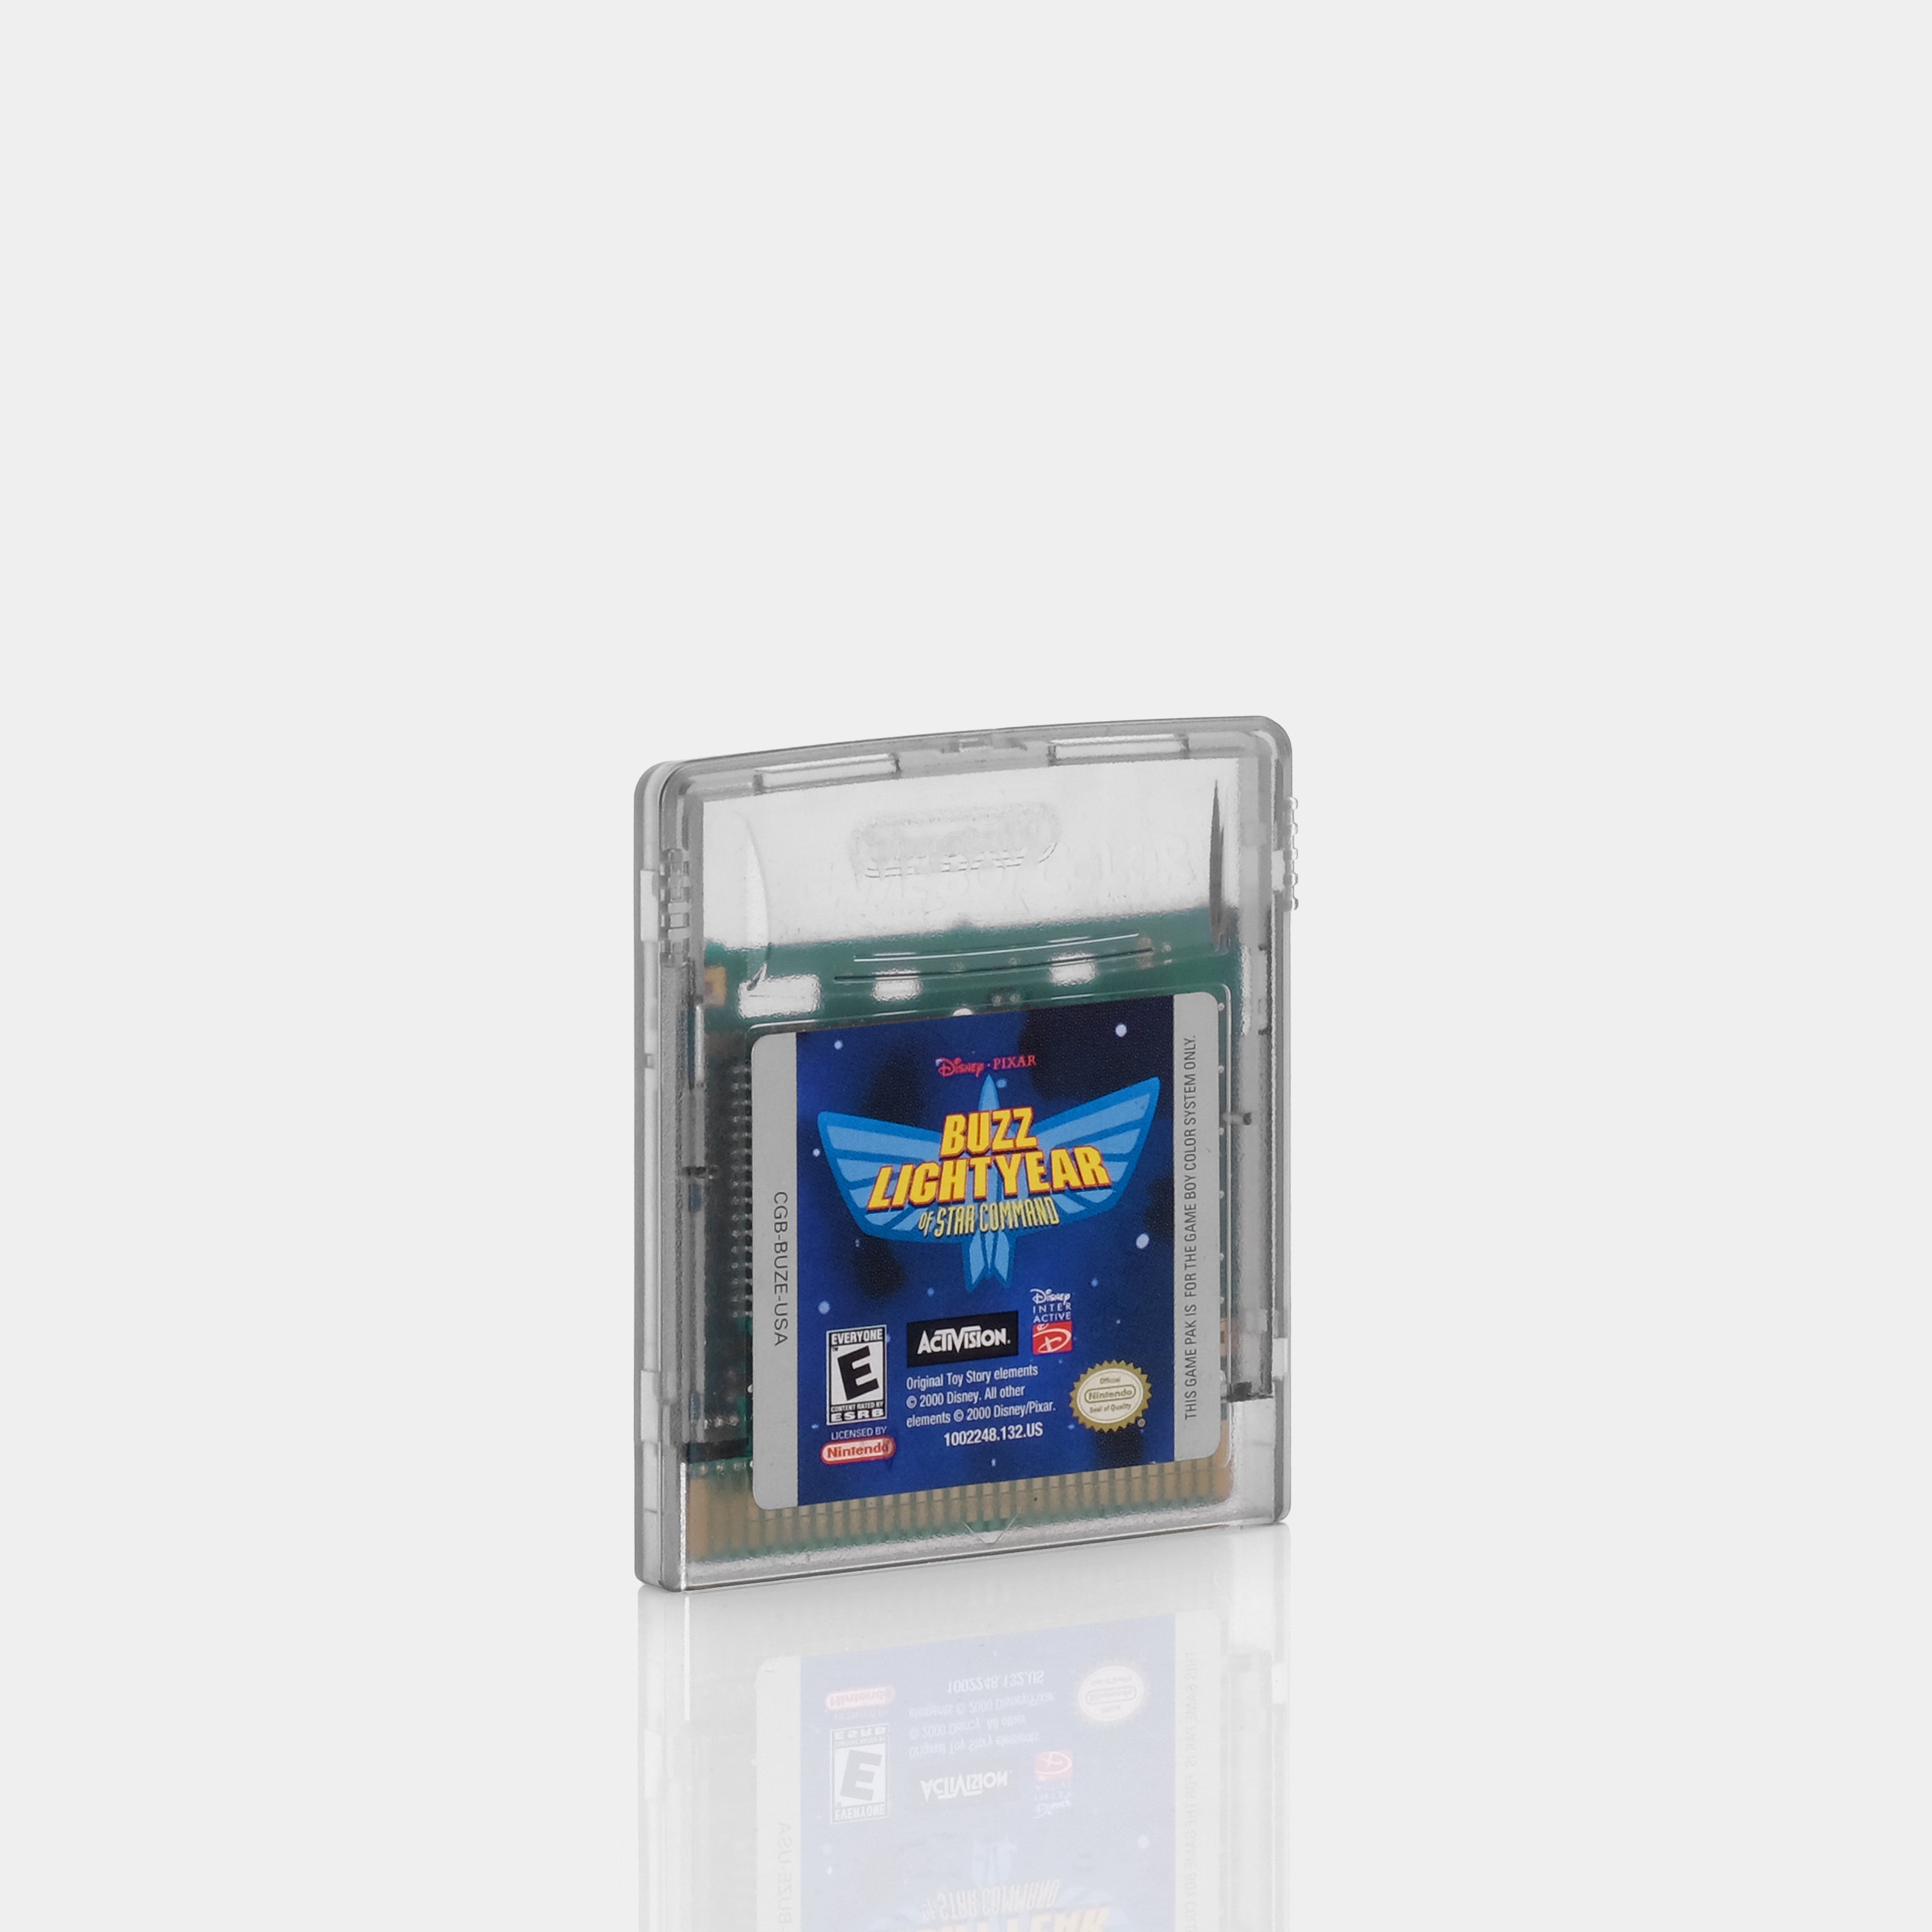 Buzz Lightyear of Star Command Game Boy Color Game